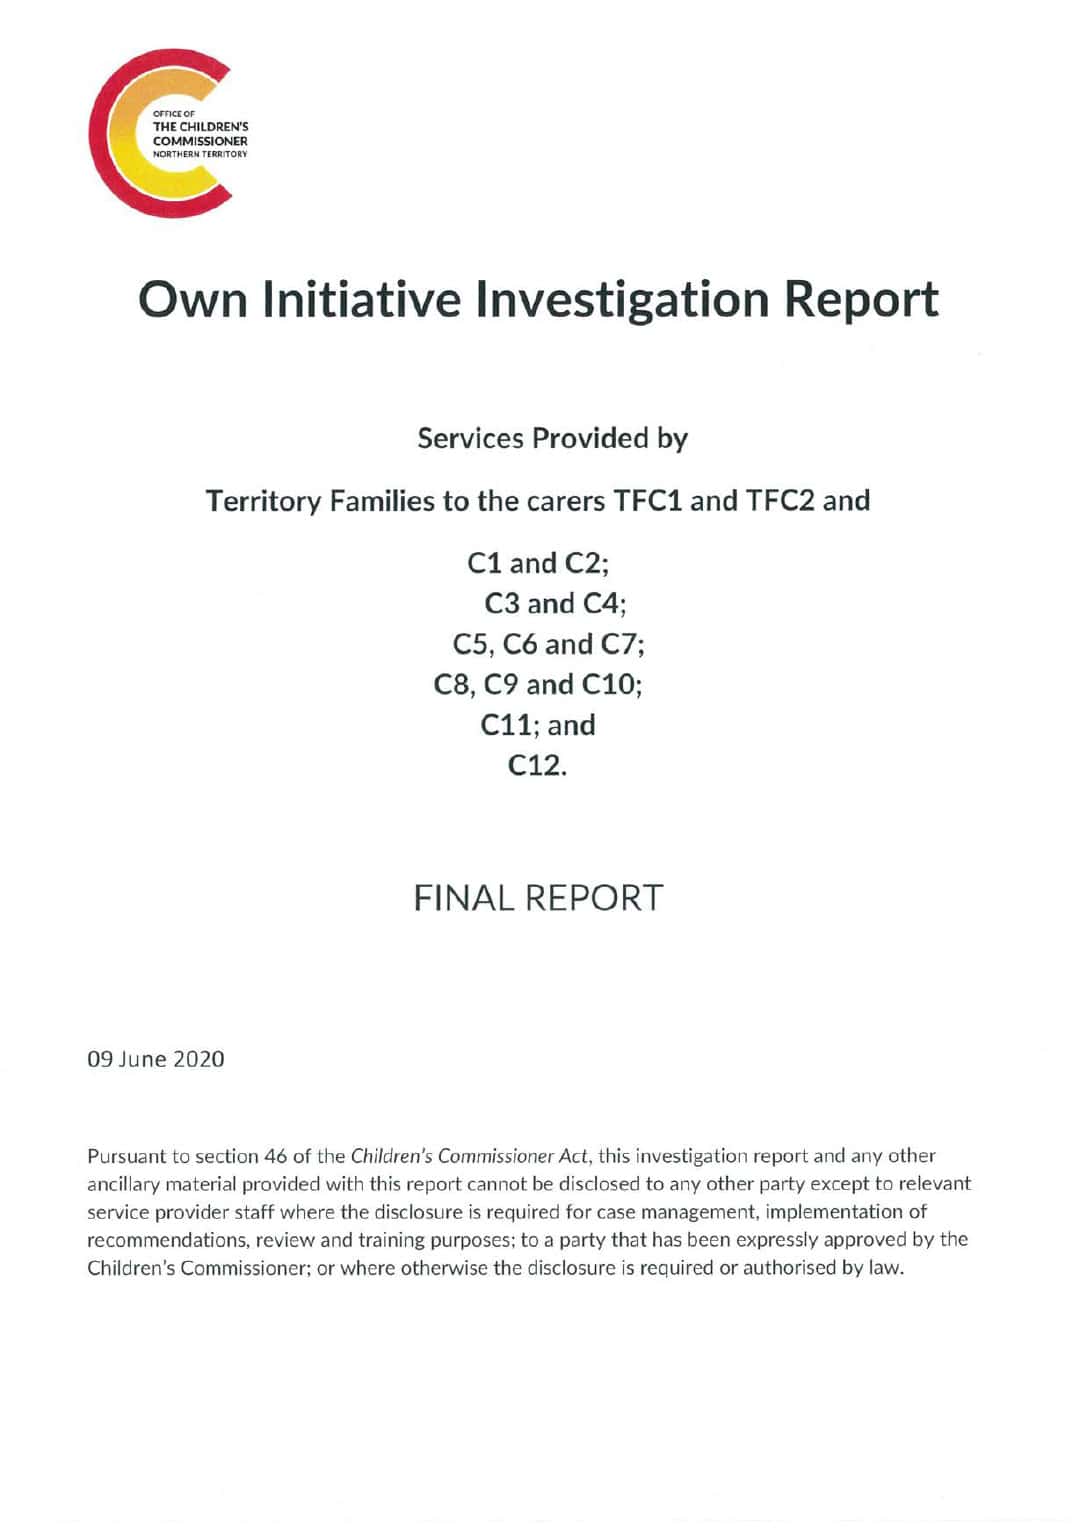 Own Initiative Investigation Report - Abuse in Care